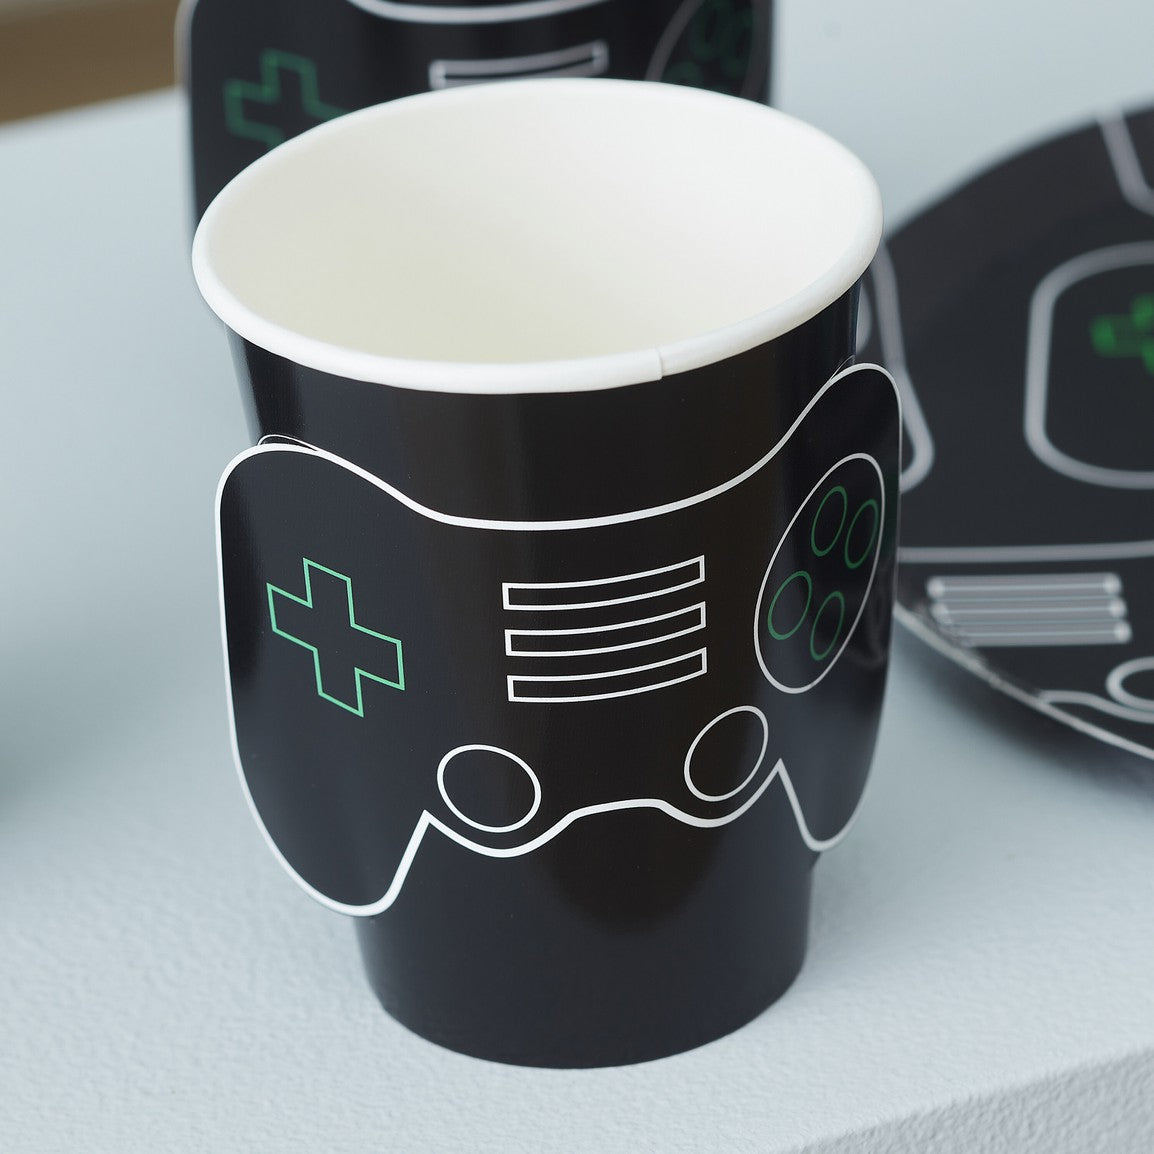 CUPS - LEVEL UP GAMING POP-OUT CONTROLLER